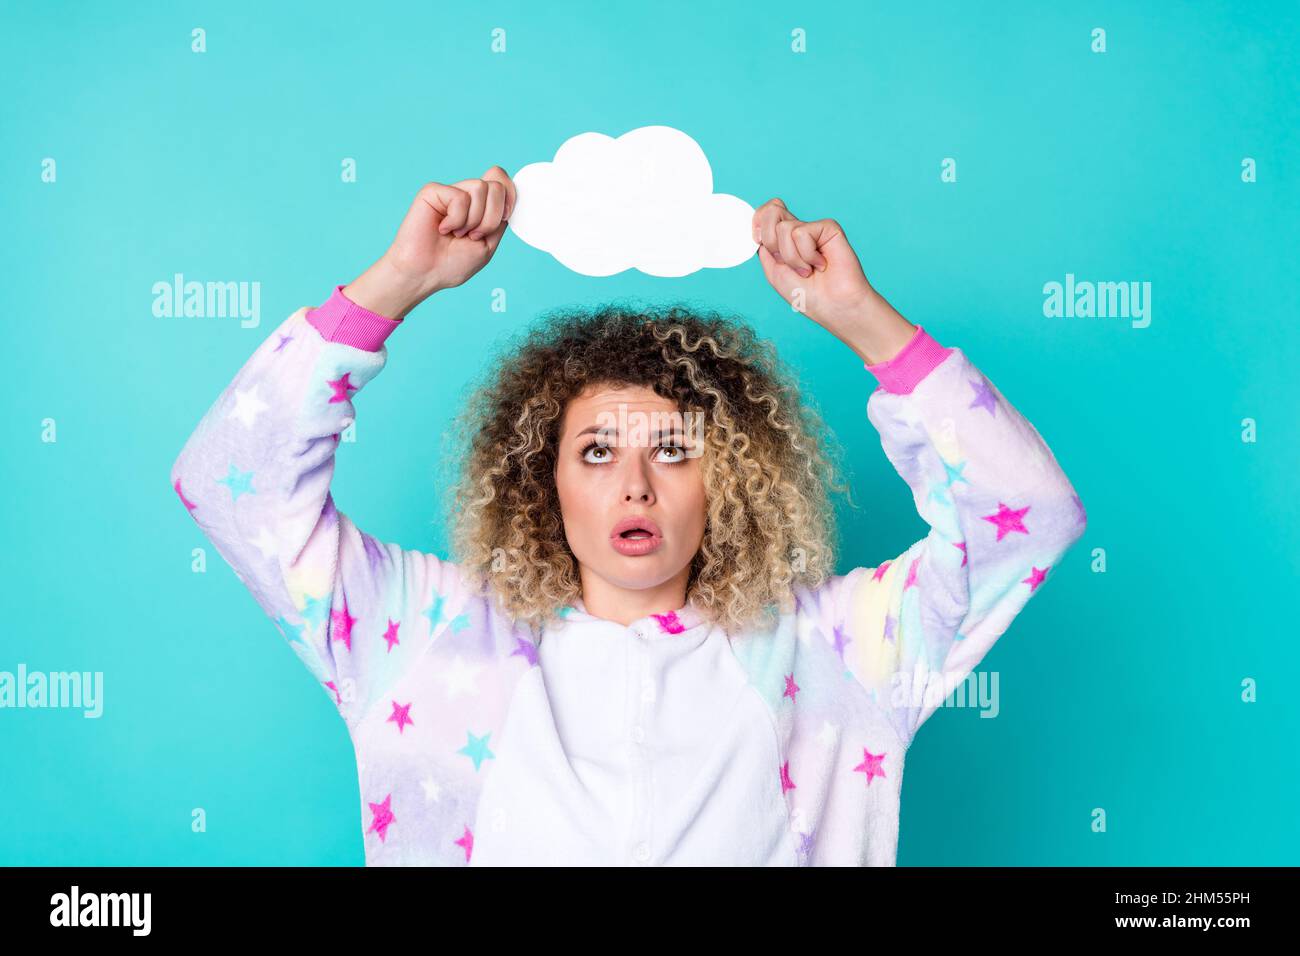 Portrait of attractive worried wavy-haired girl holding copy space bubble advert ad isolated over bright teal turquoise color background Stock Photo